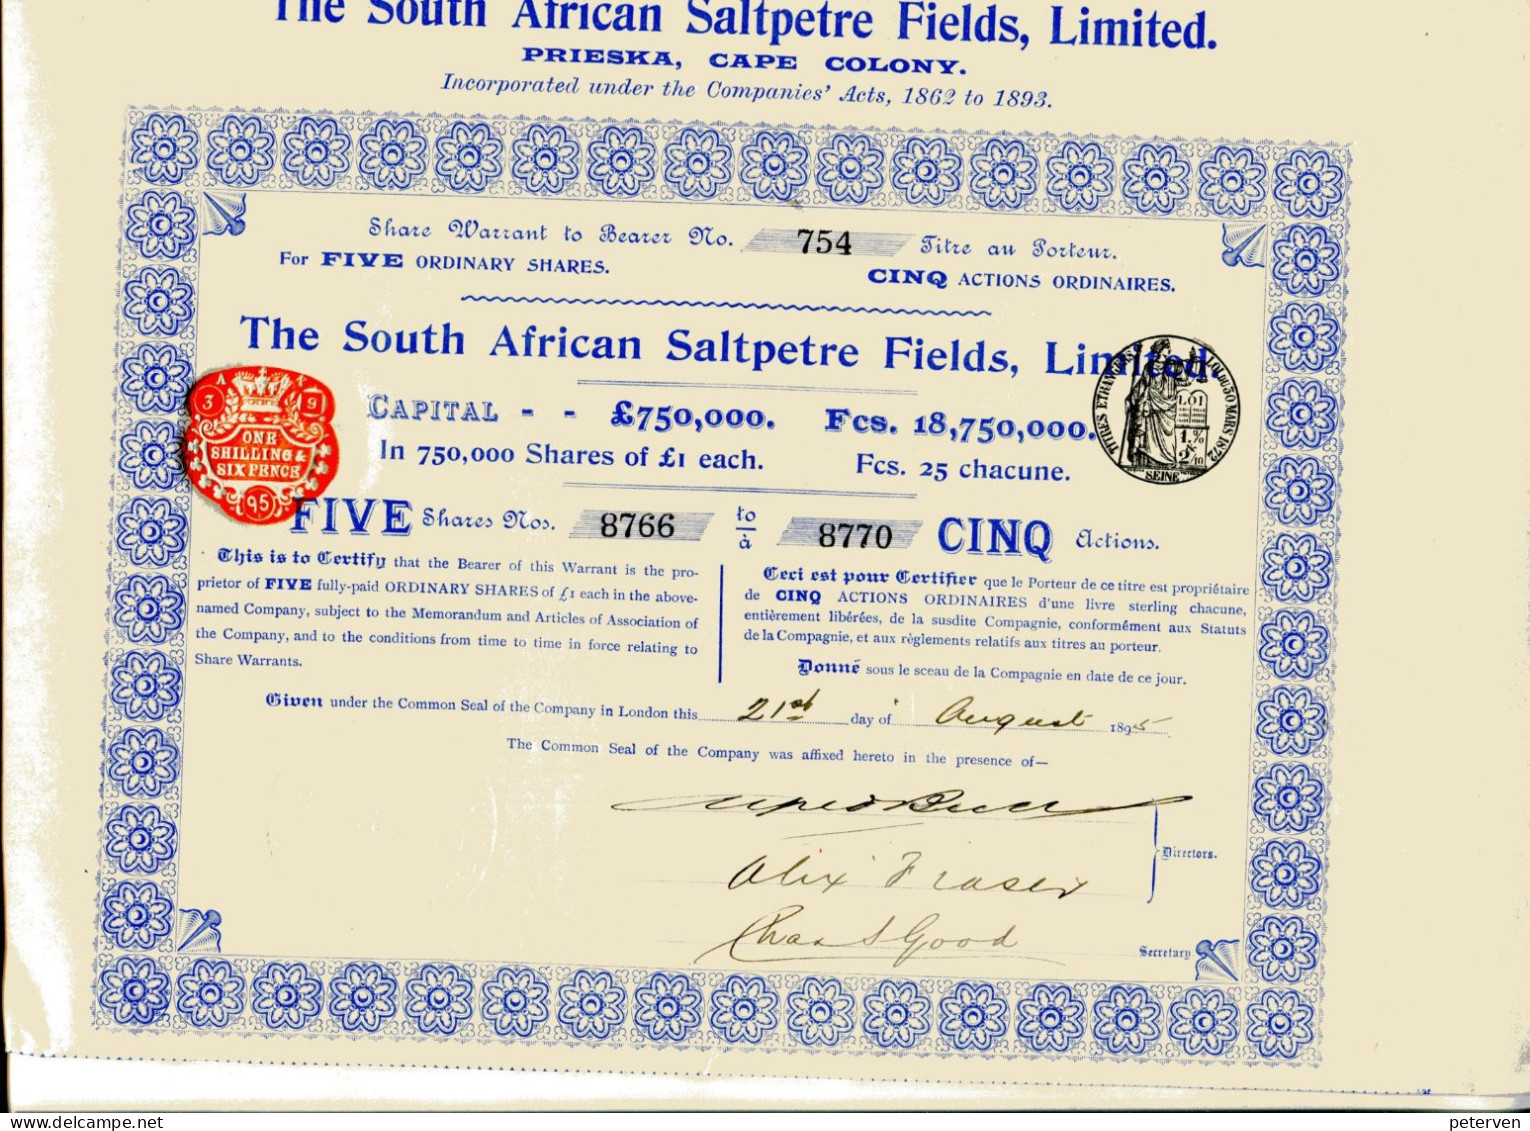 The South African Saltpetre Fields Limited; Prieska, Cape Colony - Mineral